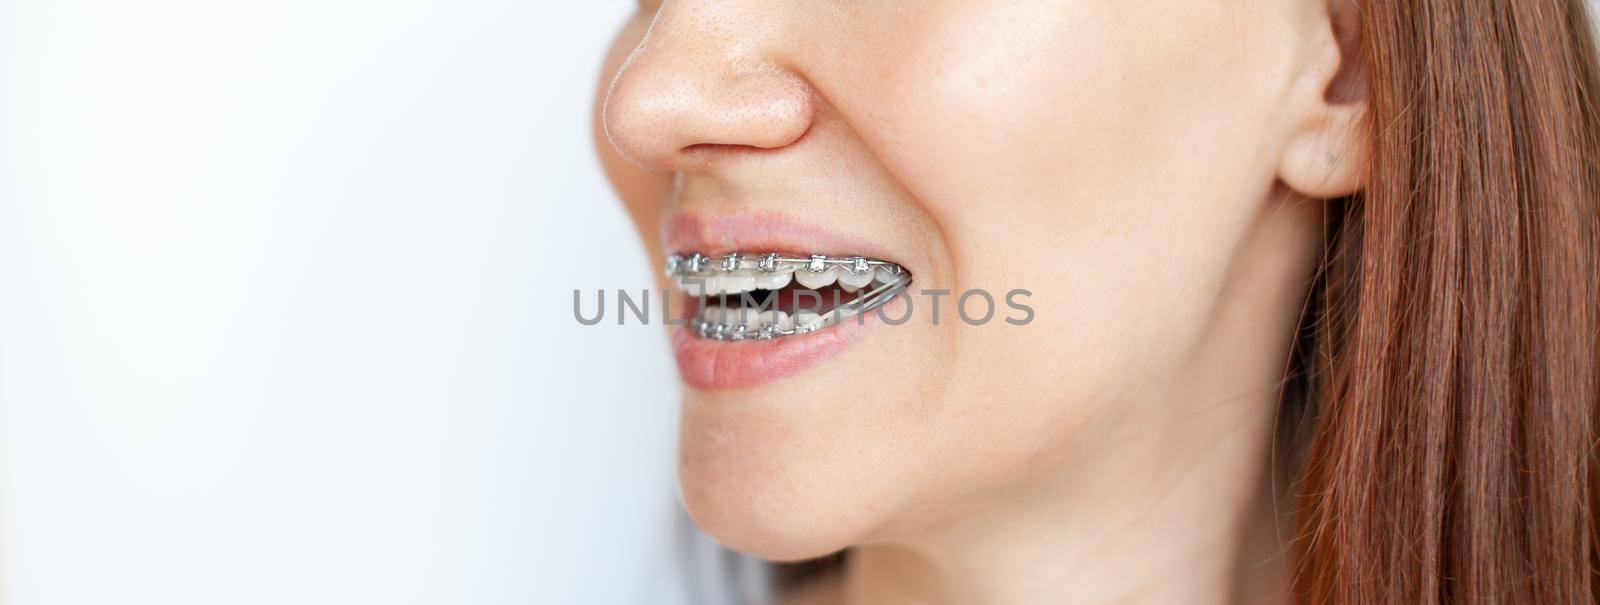 The woman smiles, showing her white teeth with braces. Even teeth from wearing braces. The concept of a dentist and an orthodontist.